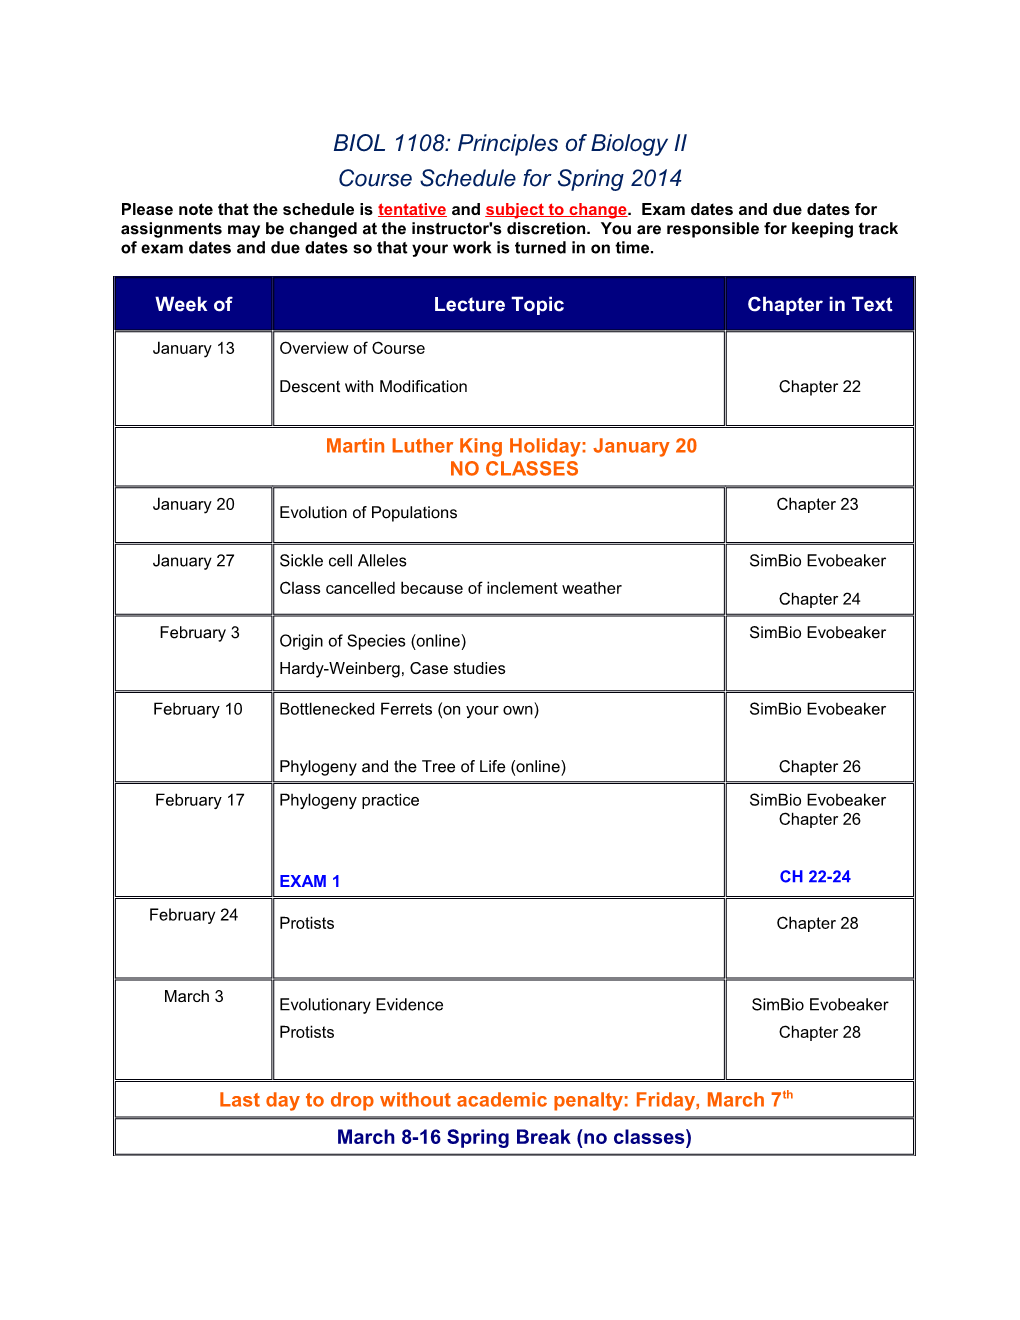 Course Schedule for Spring 2014